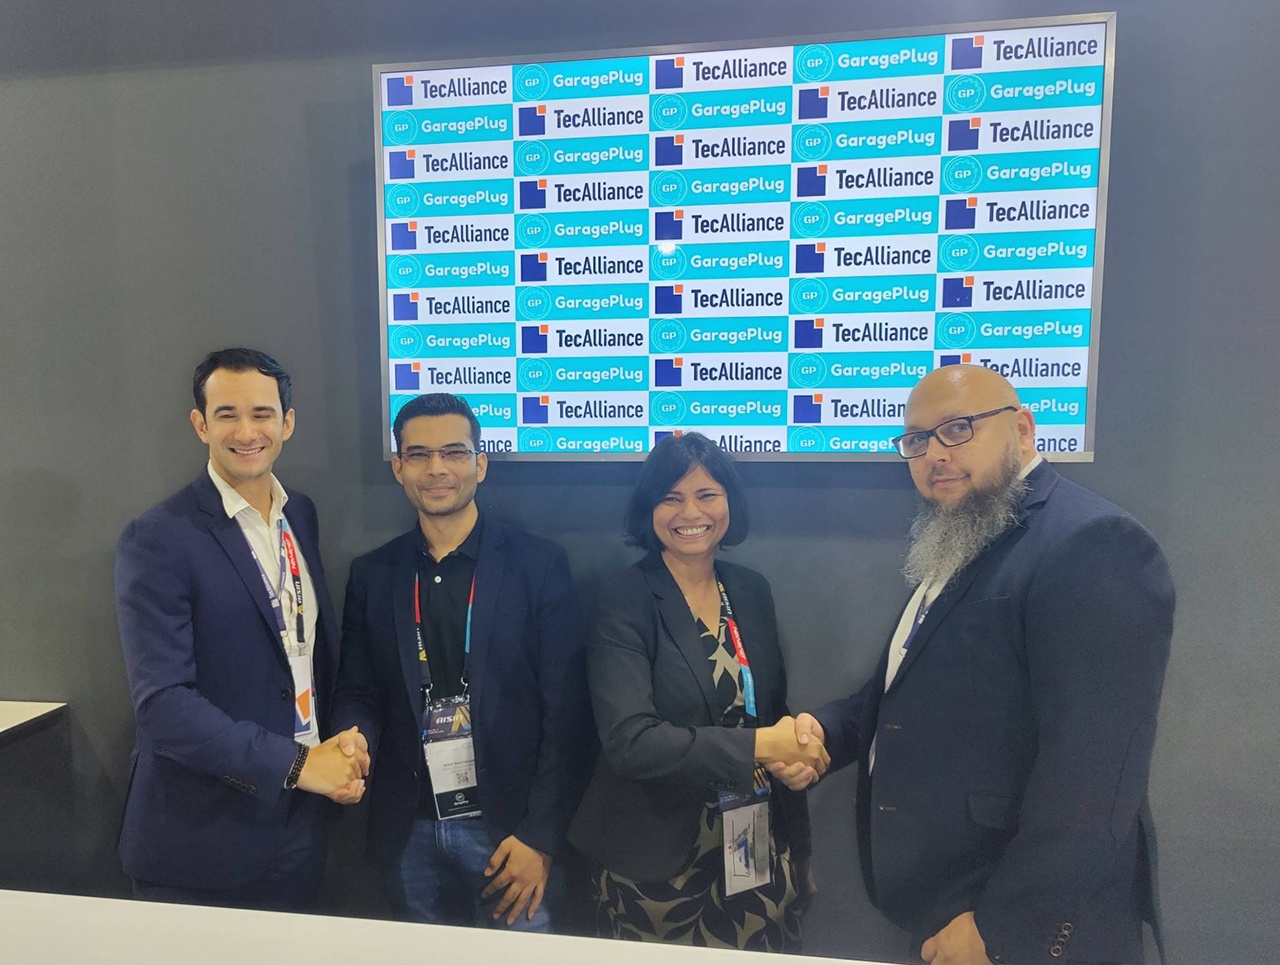 GaragePlug partners with TecAlliance to drive digital transformation in the Middle East